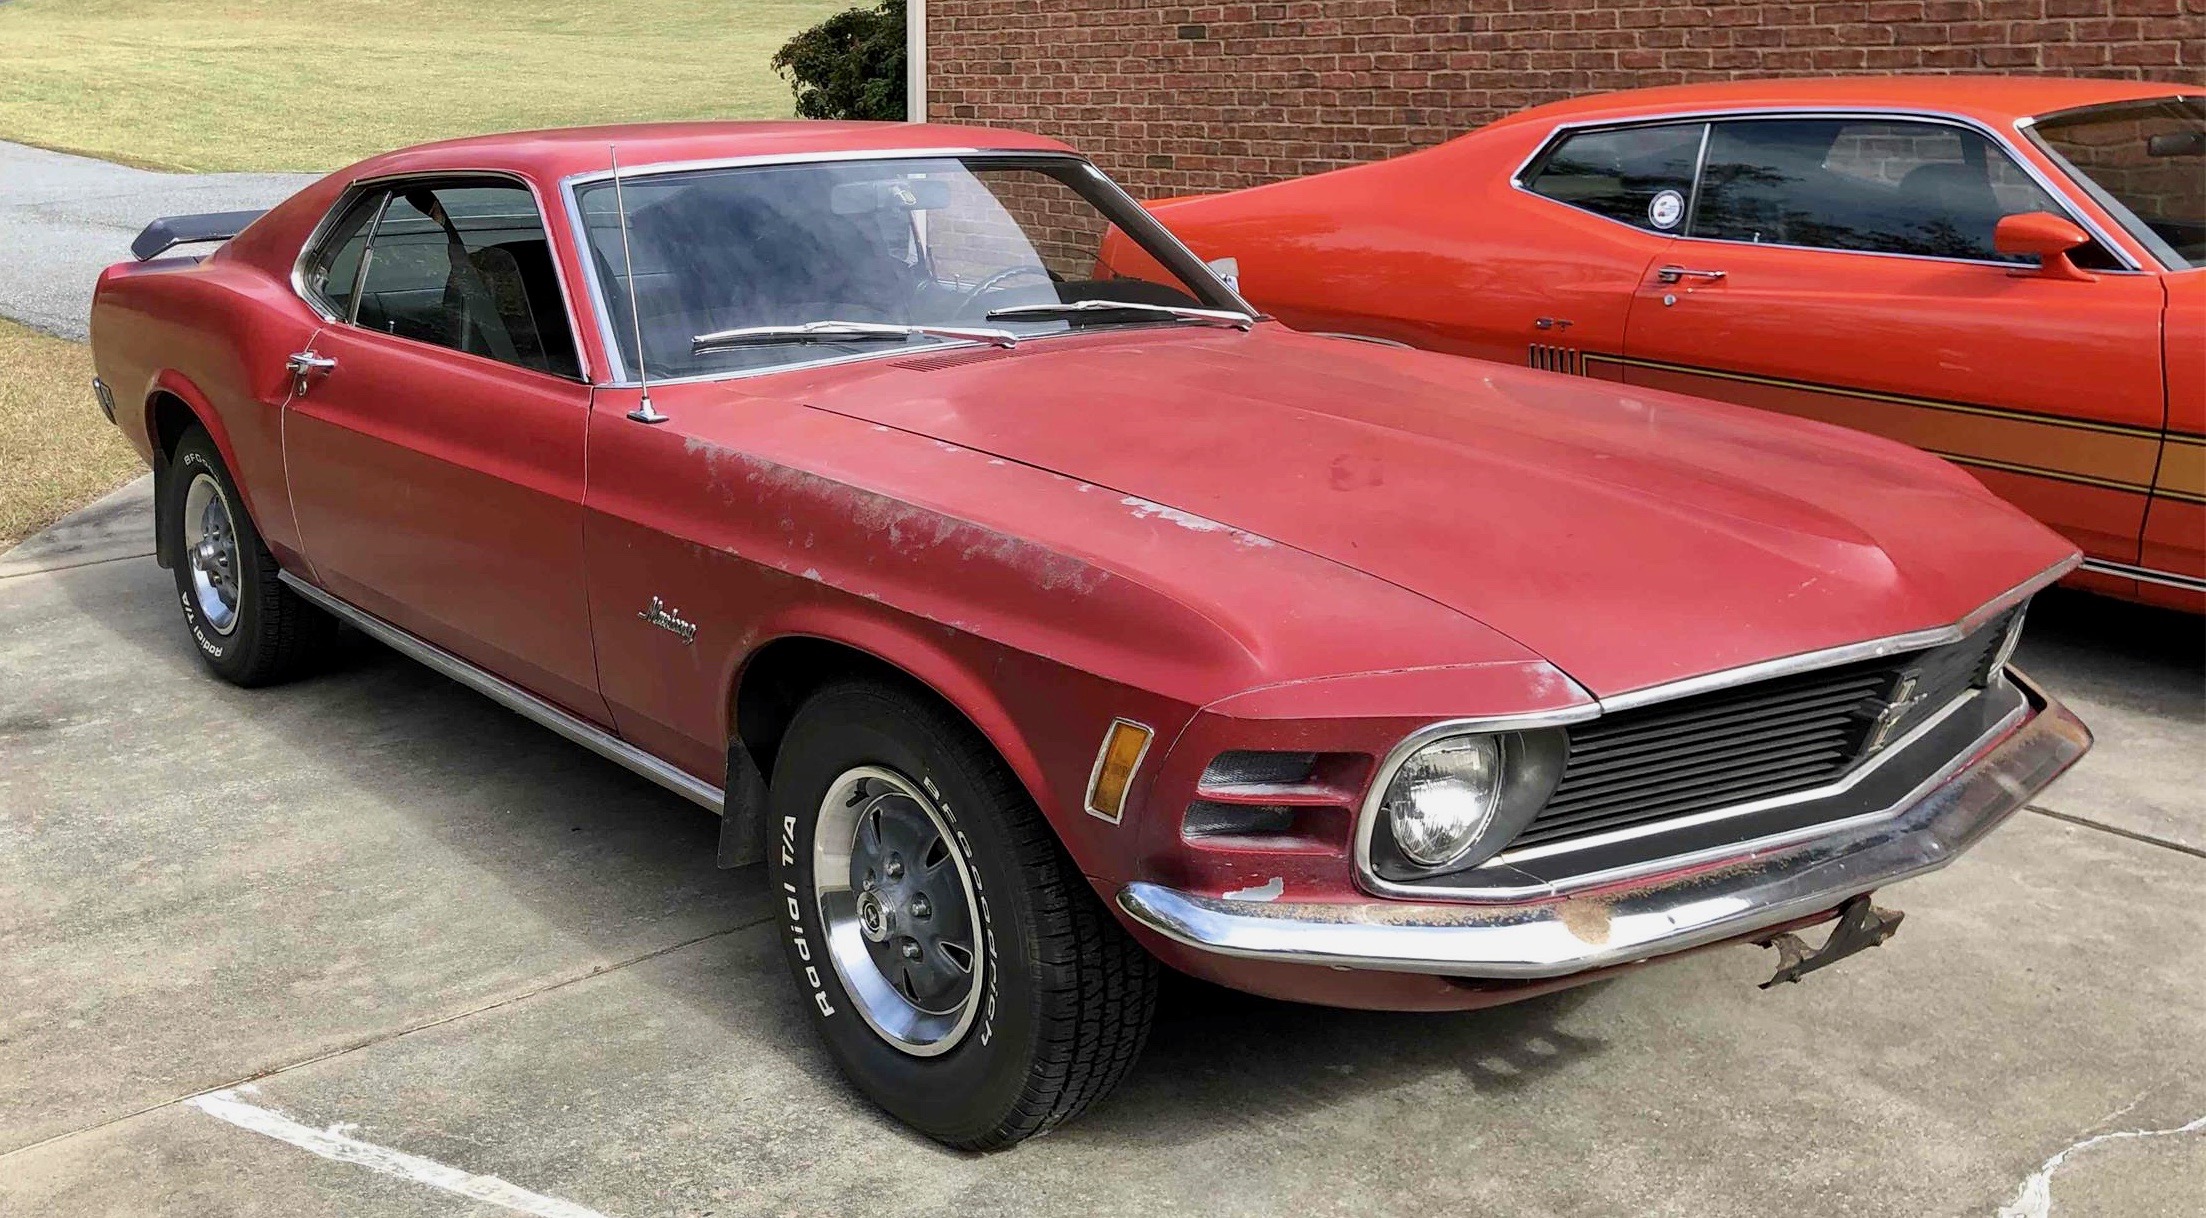 1970 Ford Mustang, Father’s ’70 Ford Mustang still ‘runs beautifully’, ClassicCars.com Journal